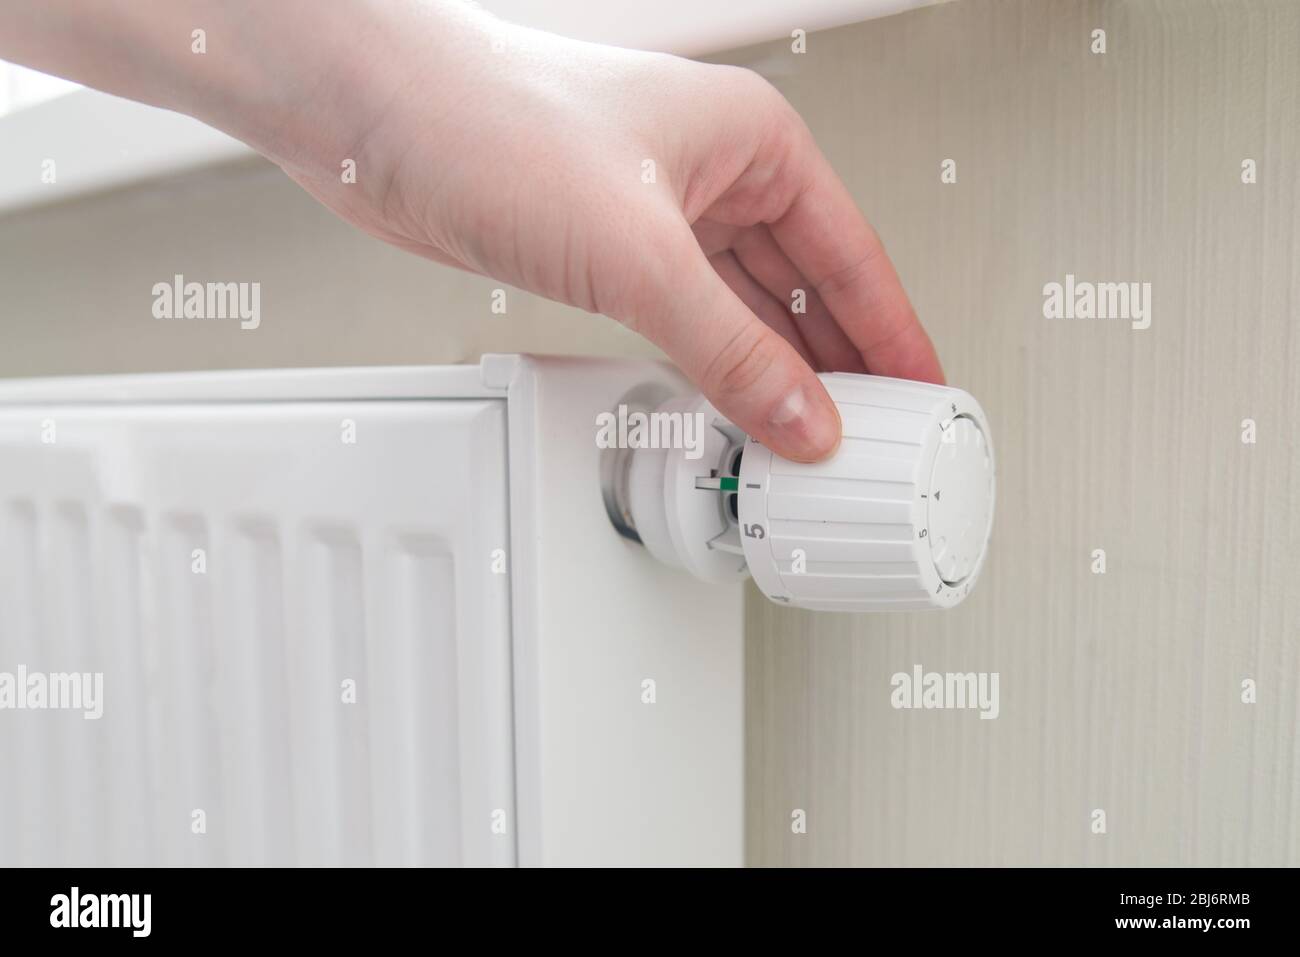 Home central heating system. Woman's hand turns the regulator. House energy efficiency Stock Photo